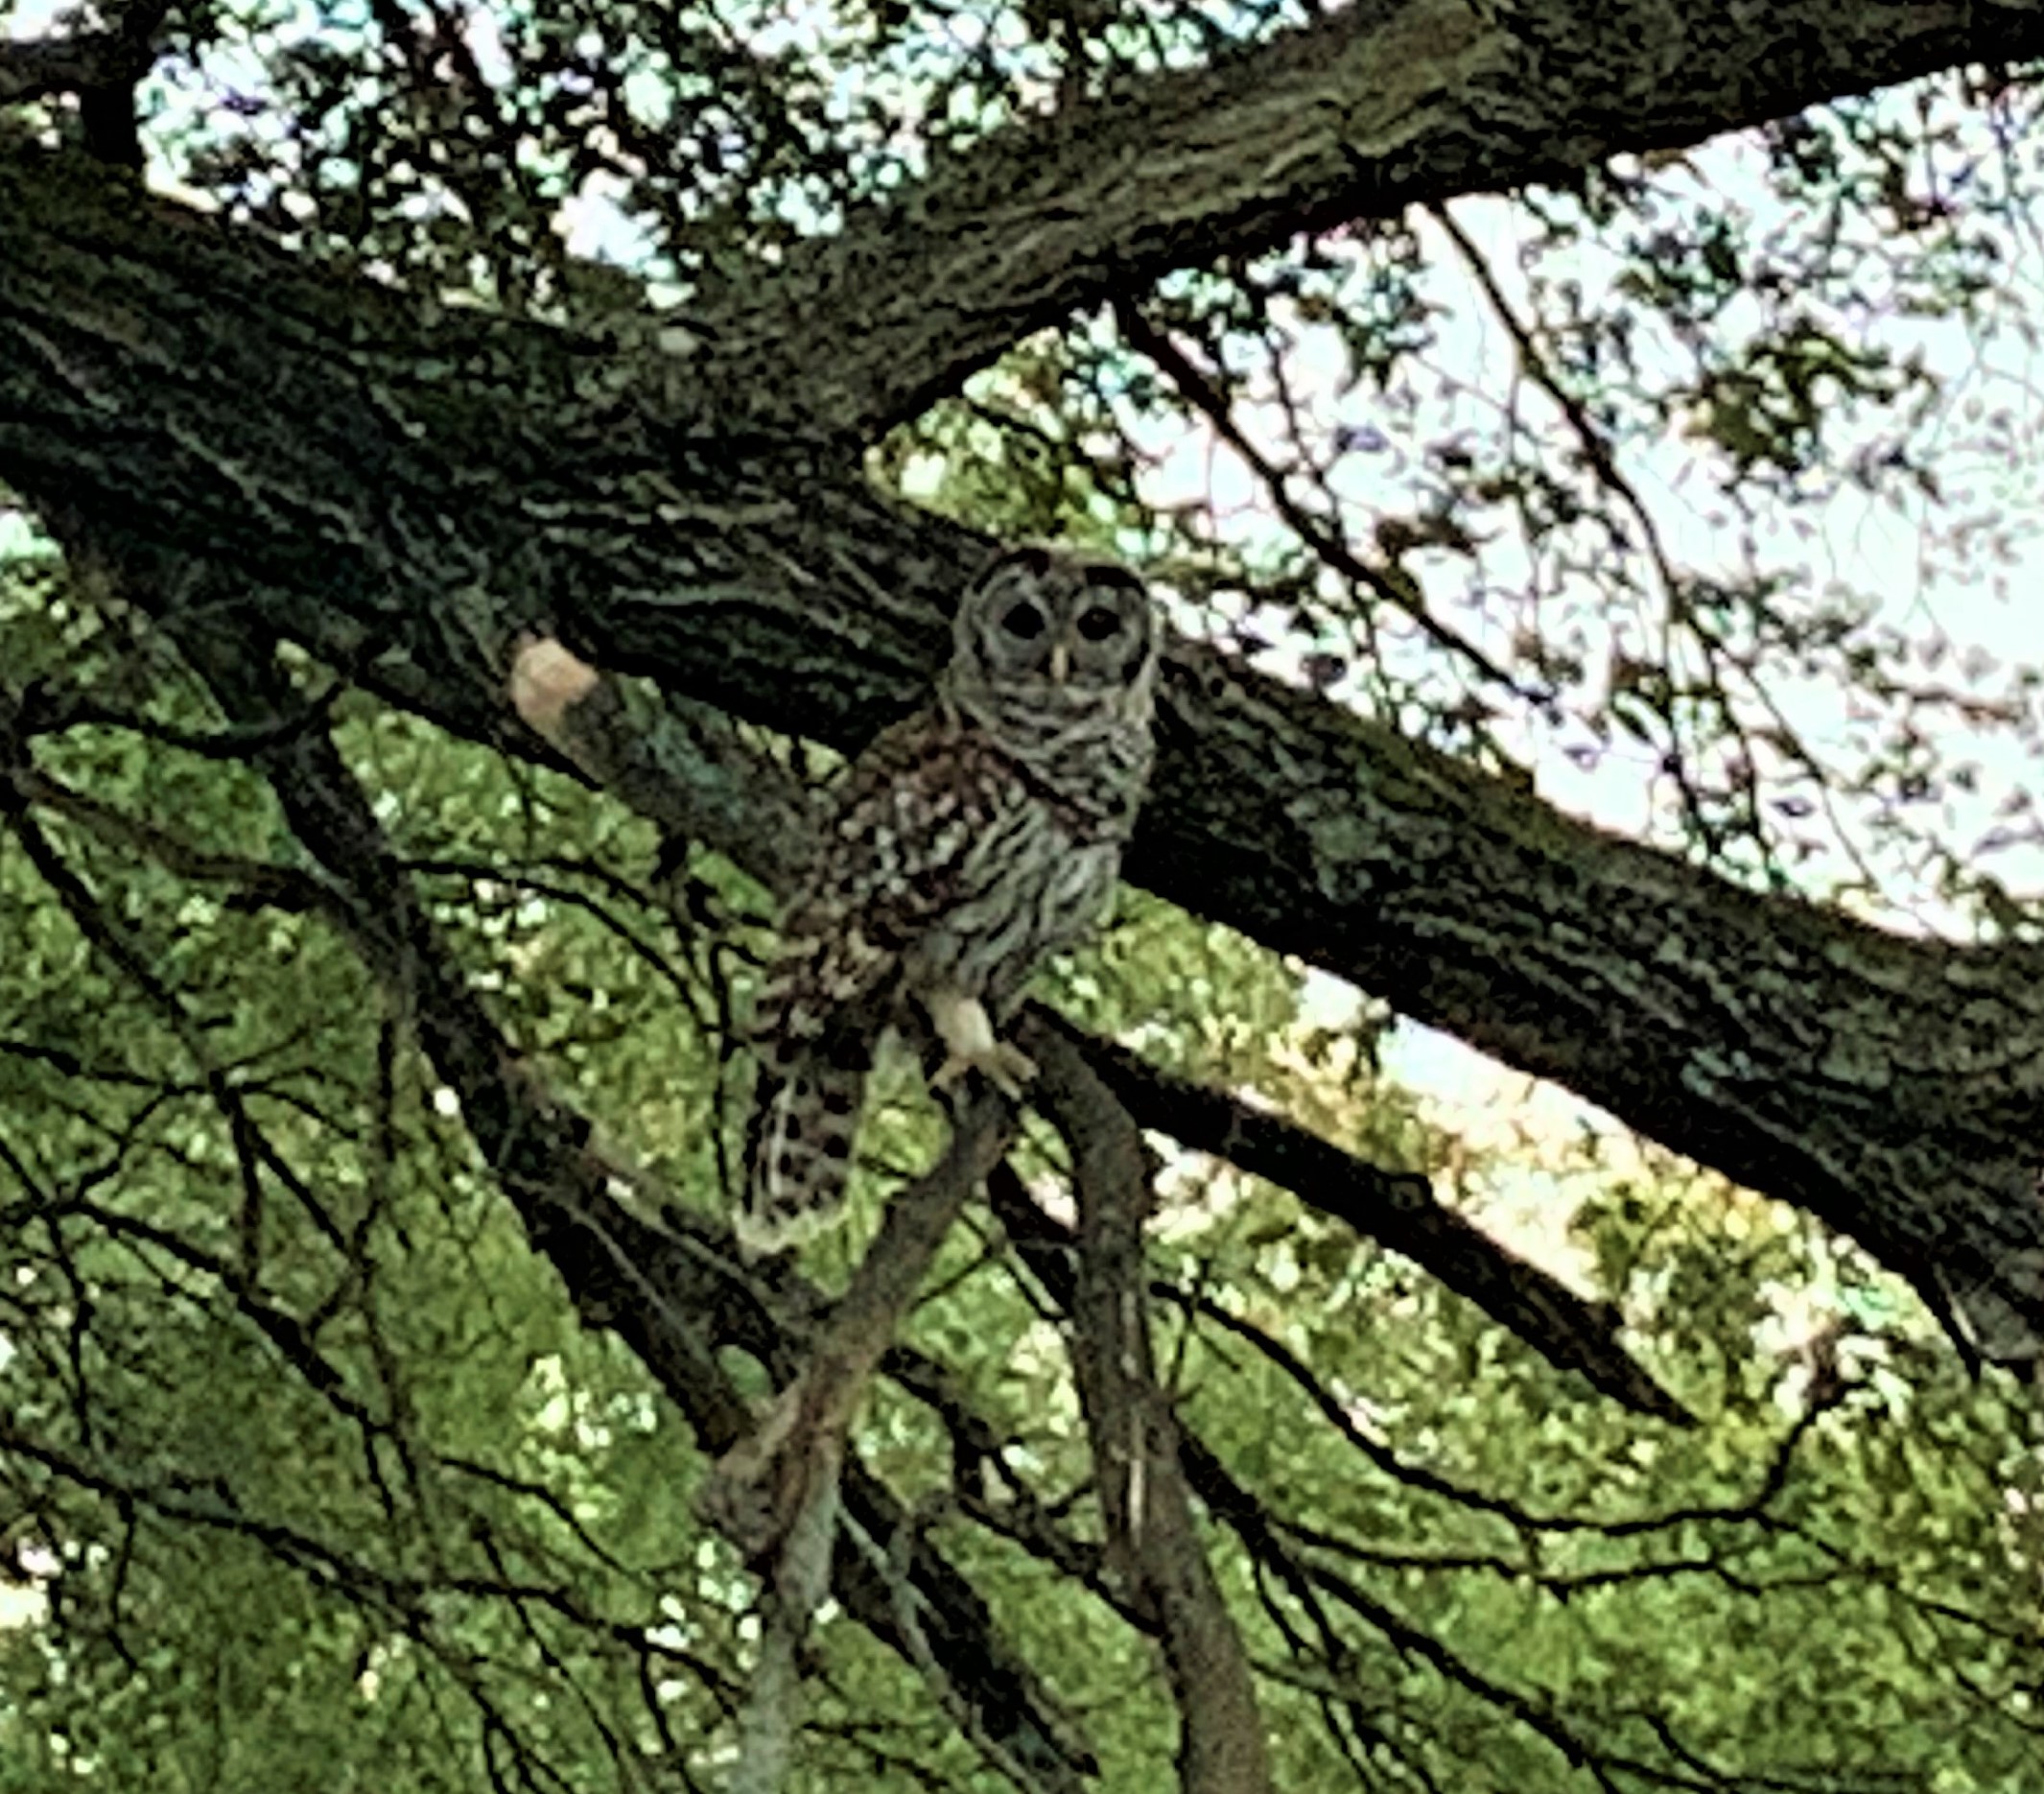 Barred owl sitting on a tree branch at the edge of the woods on Owl Acres. The bird is looking directly at the viewer.